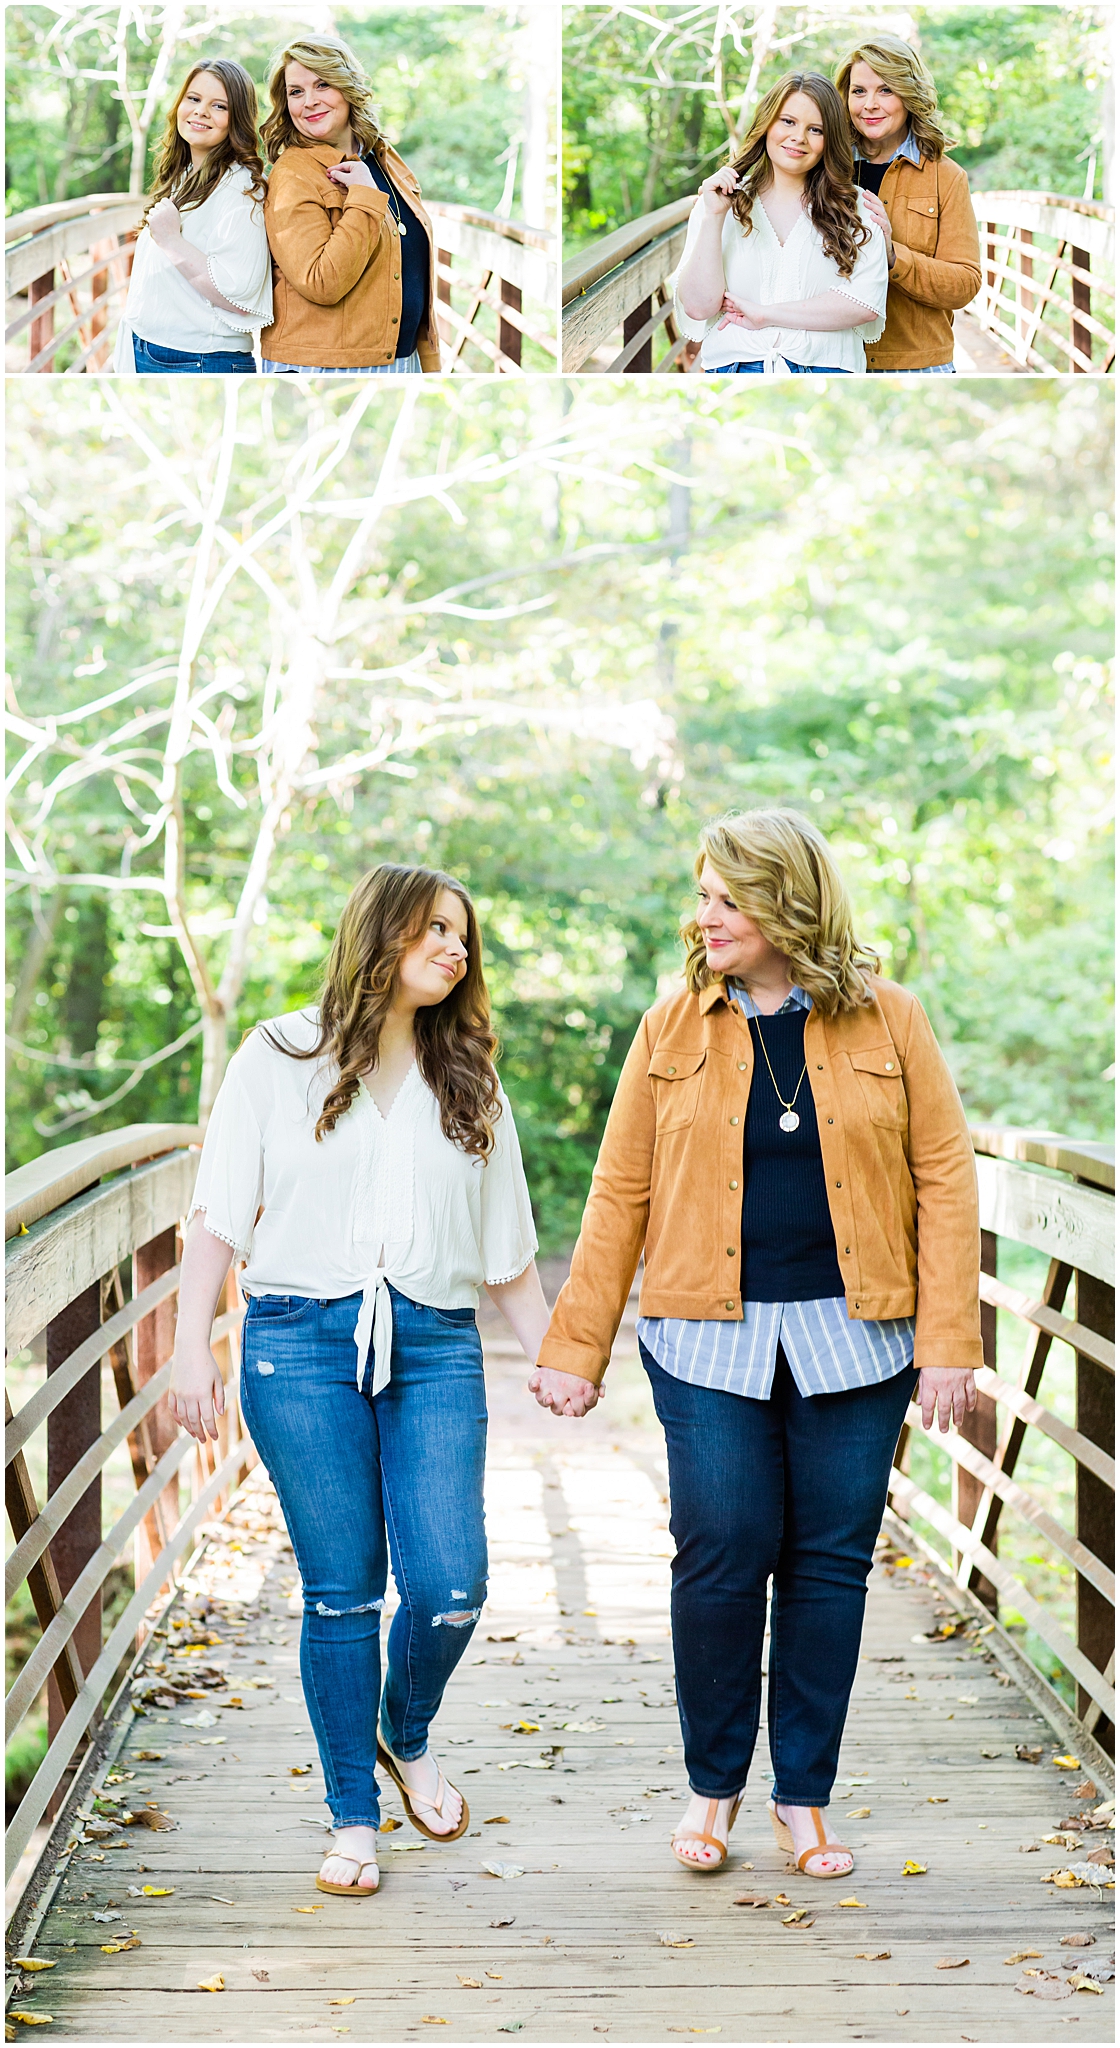 Look at these adorable Mother & Daughter photos from this mini session! Outdoors at Elanor C. Lawrence Park in Fairfax, VA. Beautiful end of summer weather. There is an adorable footbridge, btw. Click to view full session! Photographed by Bethanie Vetter Photography LLC.#ElanorCLawrence #ElanorCLawrencePark #ECLawrencePark #footbridge #motherdaughtermini #motherdaughterminisession #fairfaxva #familyphotos